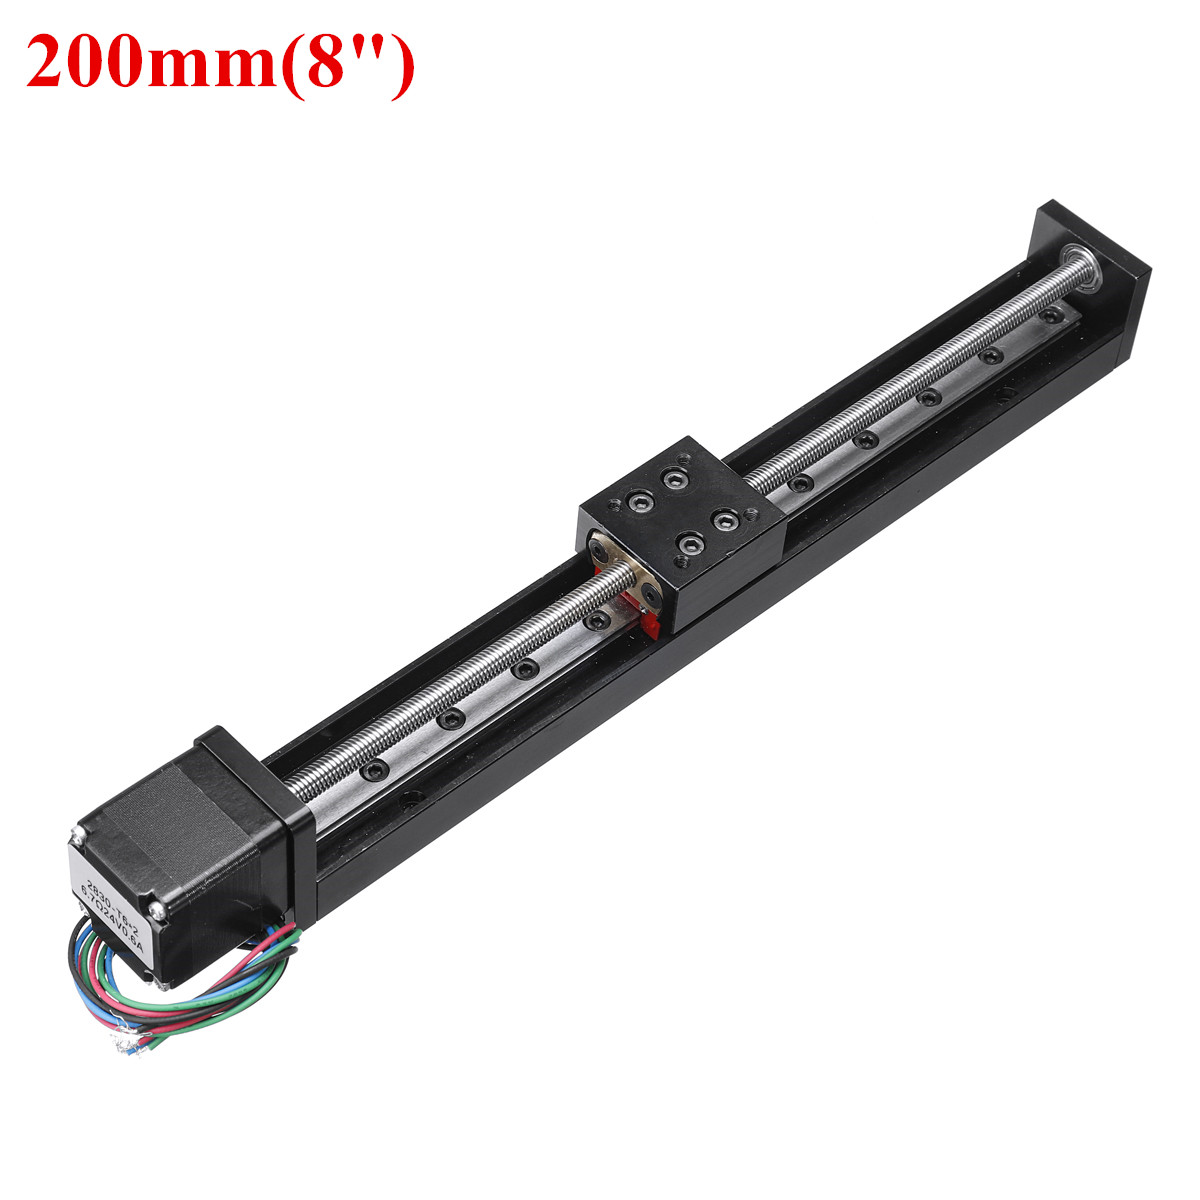 50100150200mm-T6-Linear-CNC-Slide-Stage-Actuator-Motor-Stepper-Stroke-Actuator-1526426-6